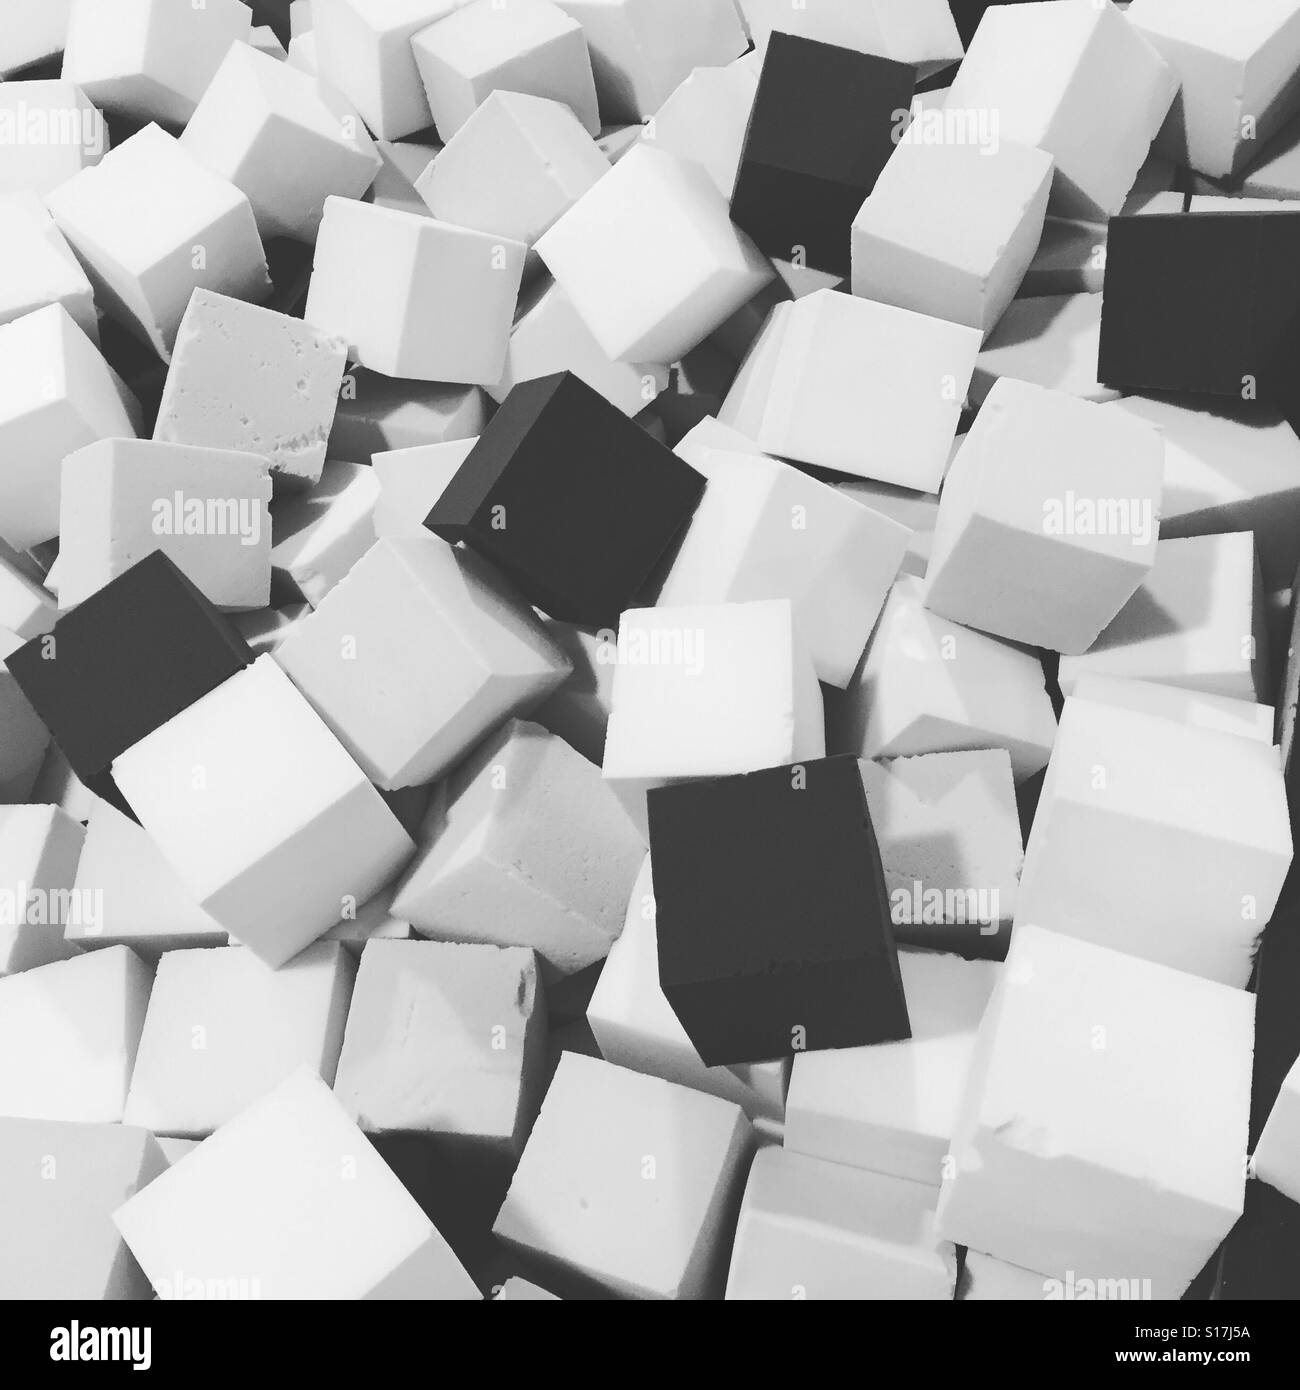 Foam Pit High Resolution Stock Photography and Images - Alamy